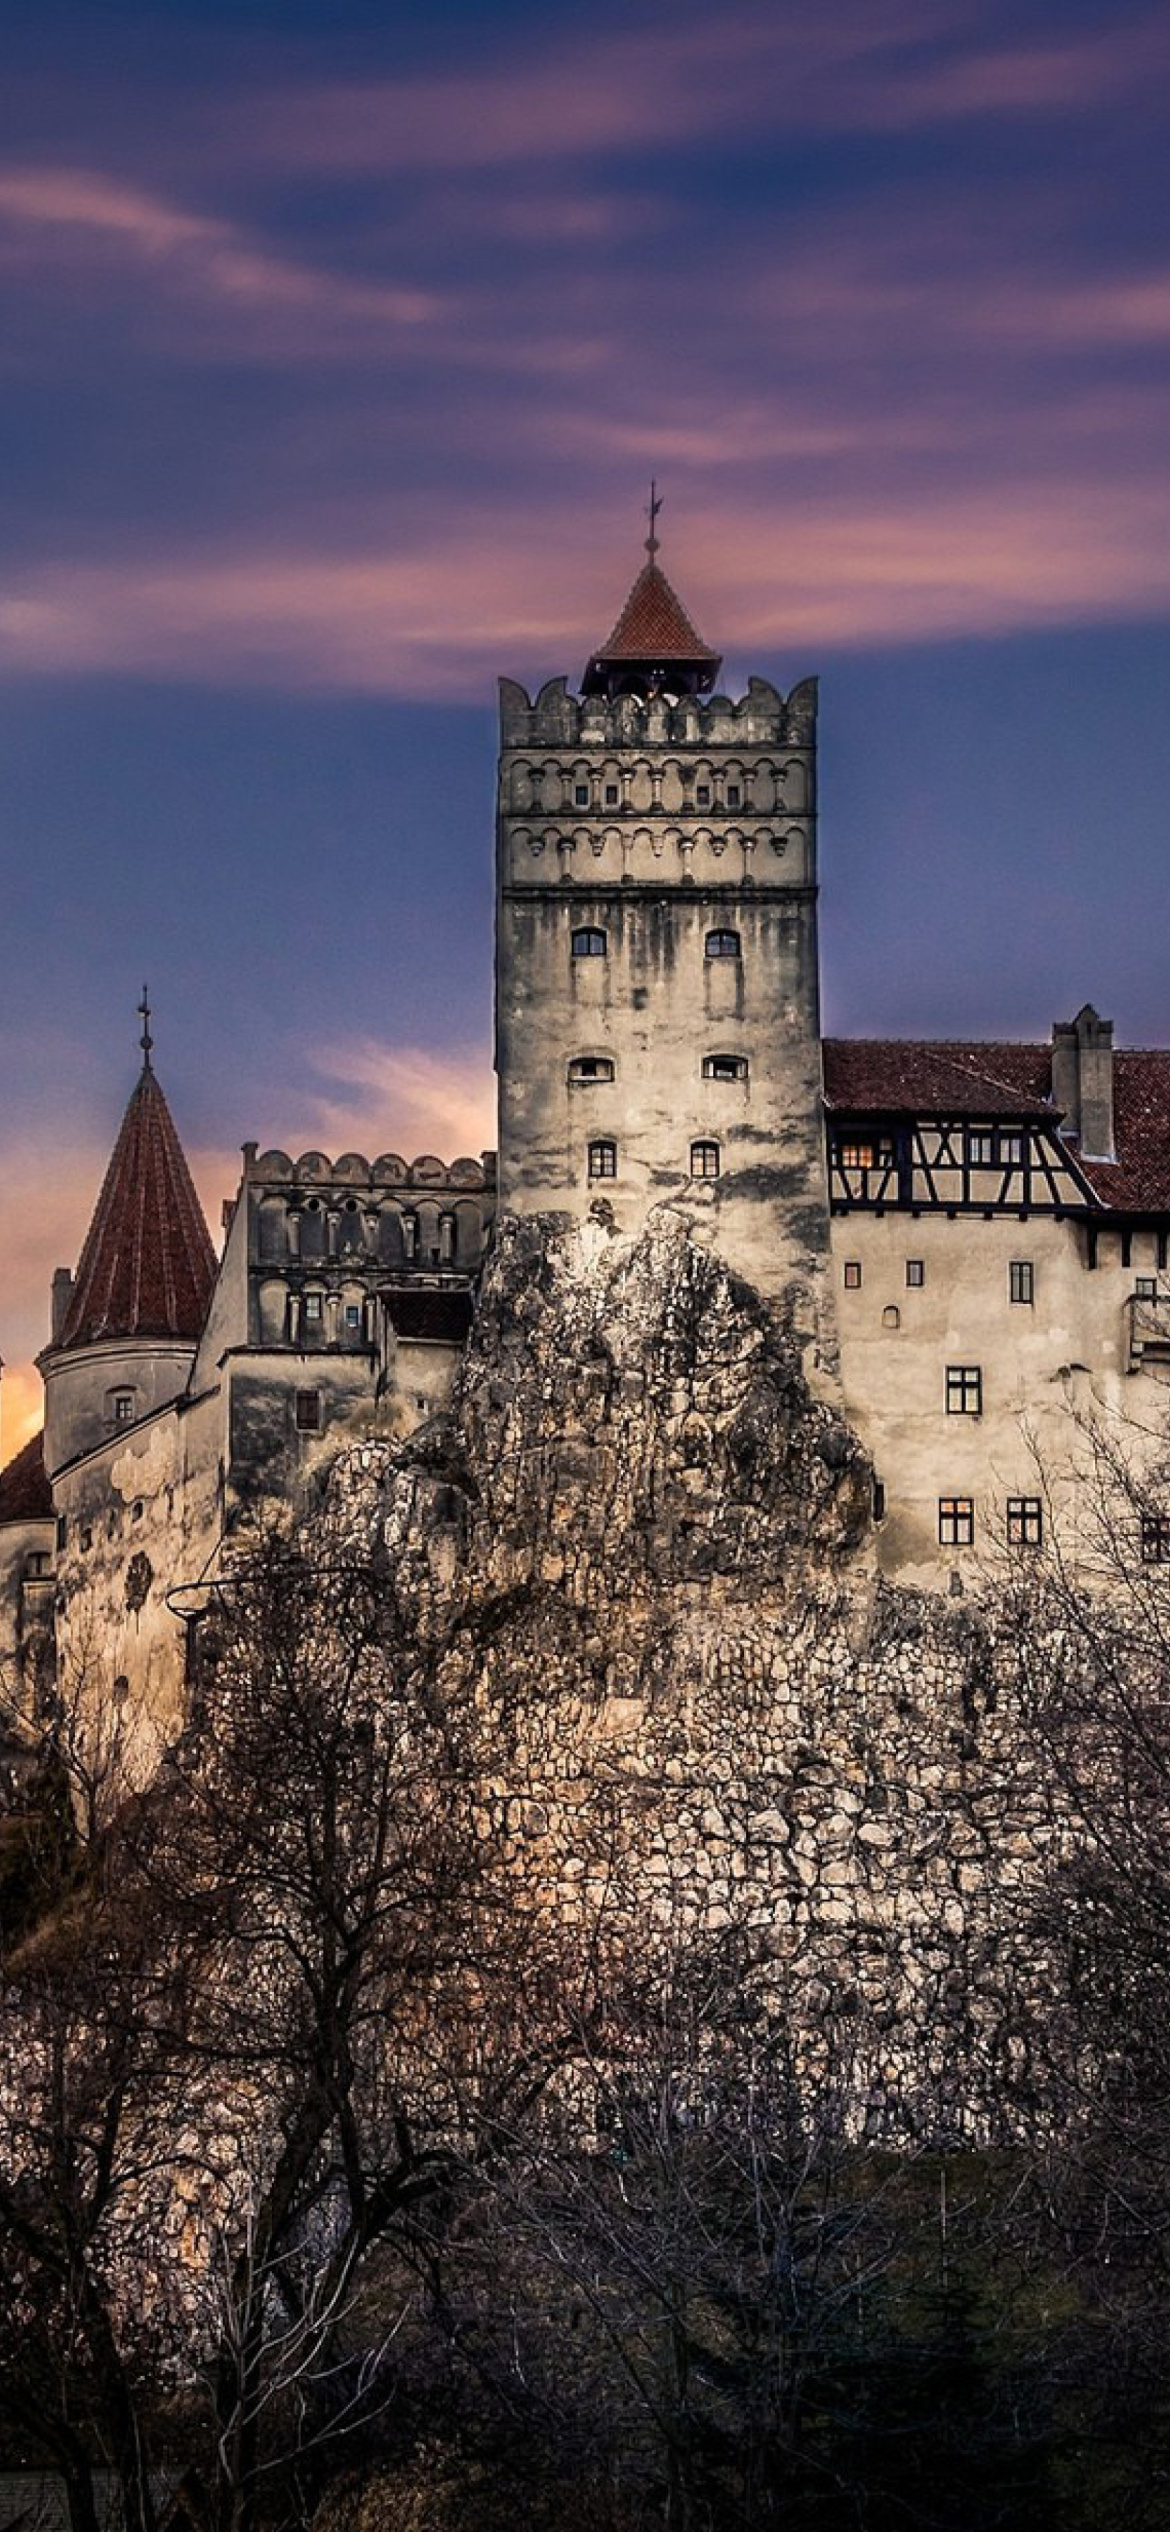 Bran Castle in Romania, Iphone wallpaper, Gothic architecture, Eerie vibes, 1170x2540 HD Handy